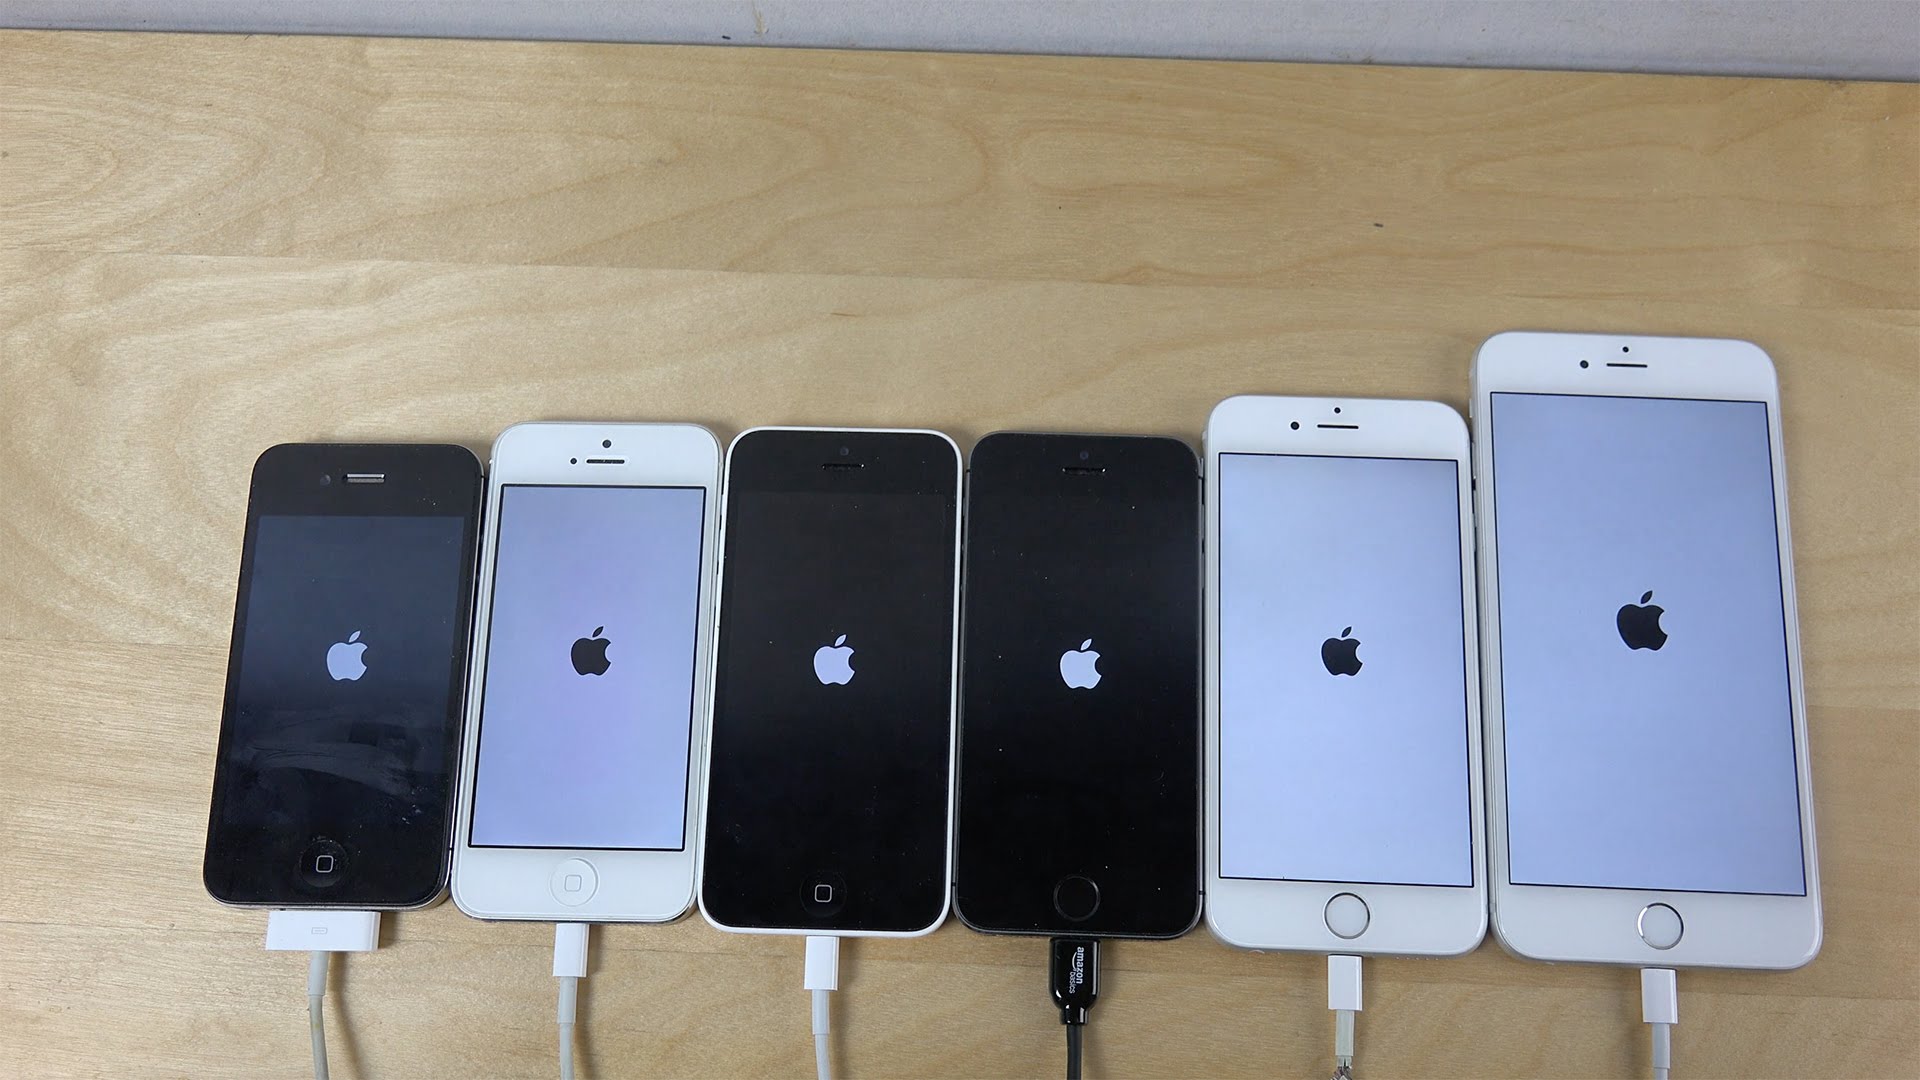 Ios 9 Beta Iphone 6 Plus Vs Iphone 6 Vs Iphone 5s 5c 5 Vs Iphone 4s Which Is Faster 4k